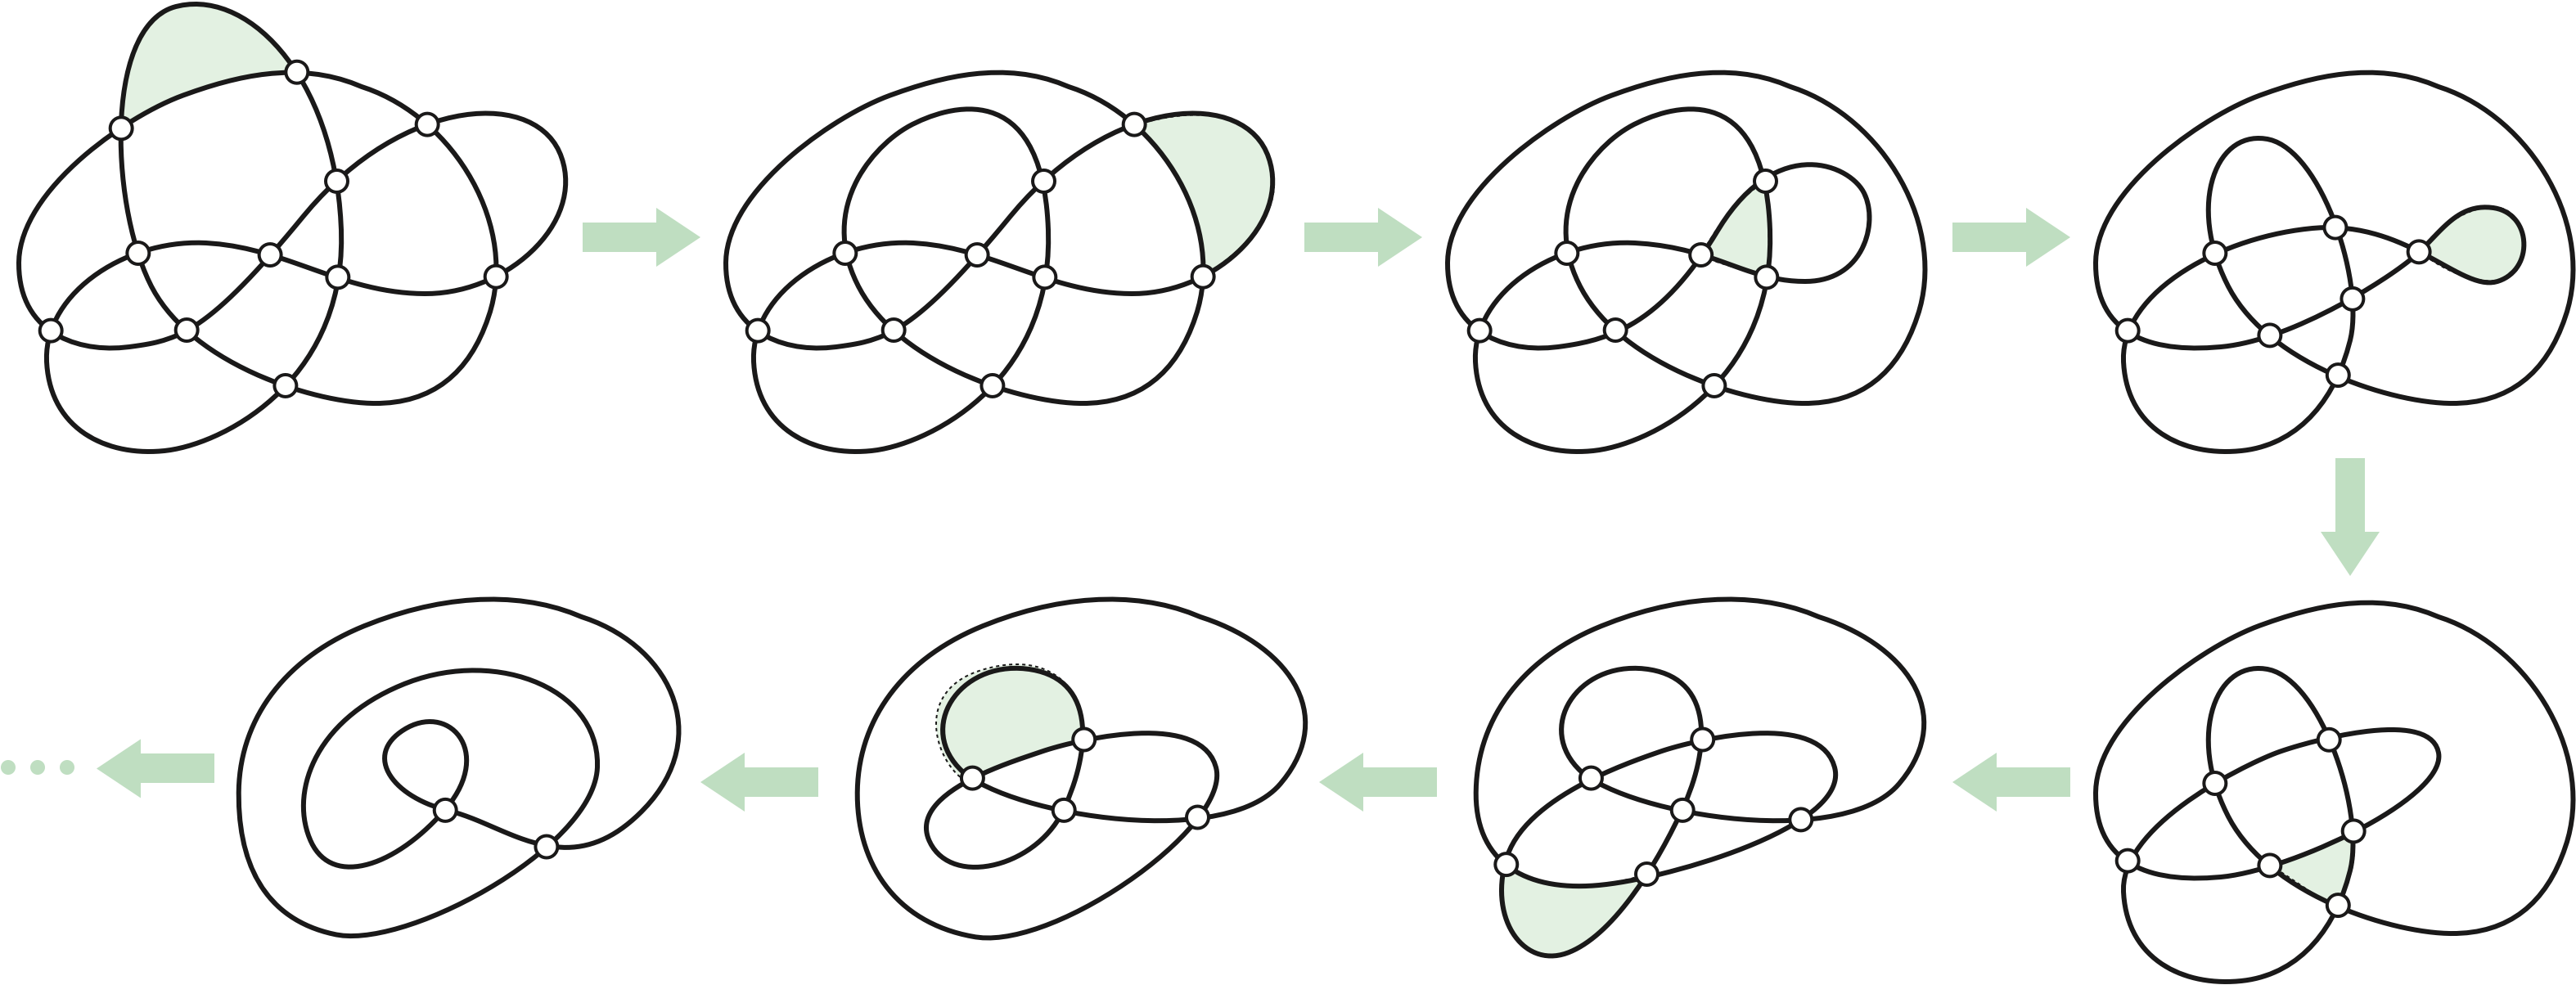 A sequence of homotopy moves simplifying the curve in Figure 1